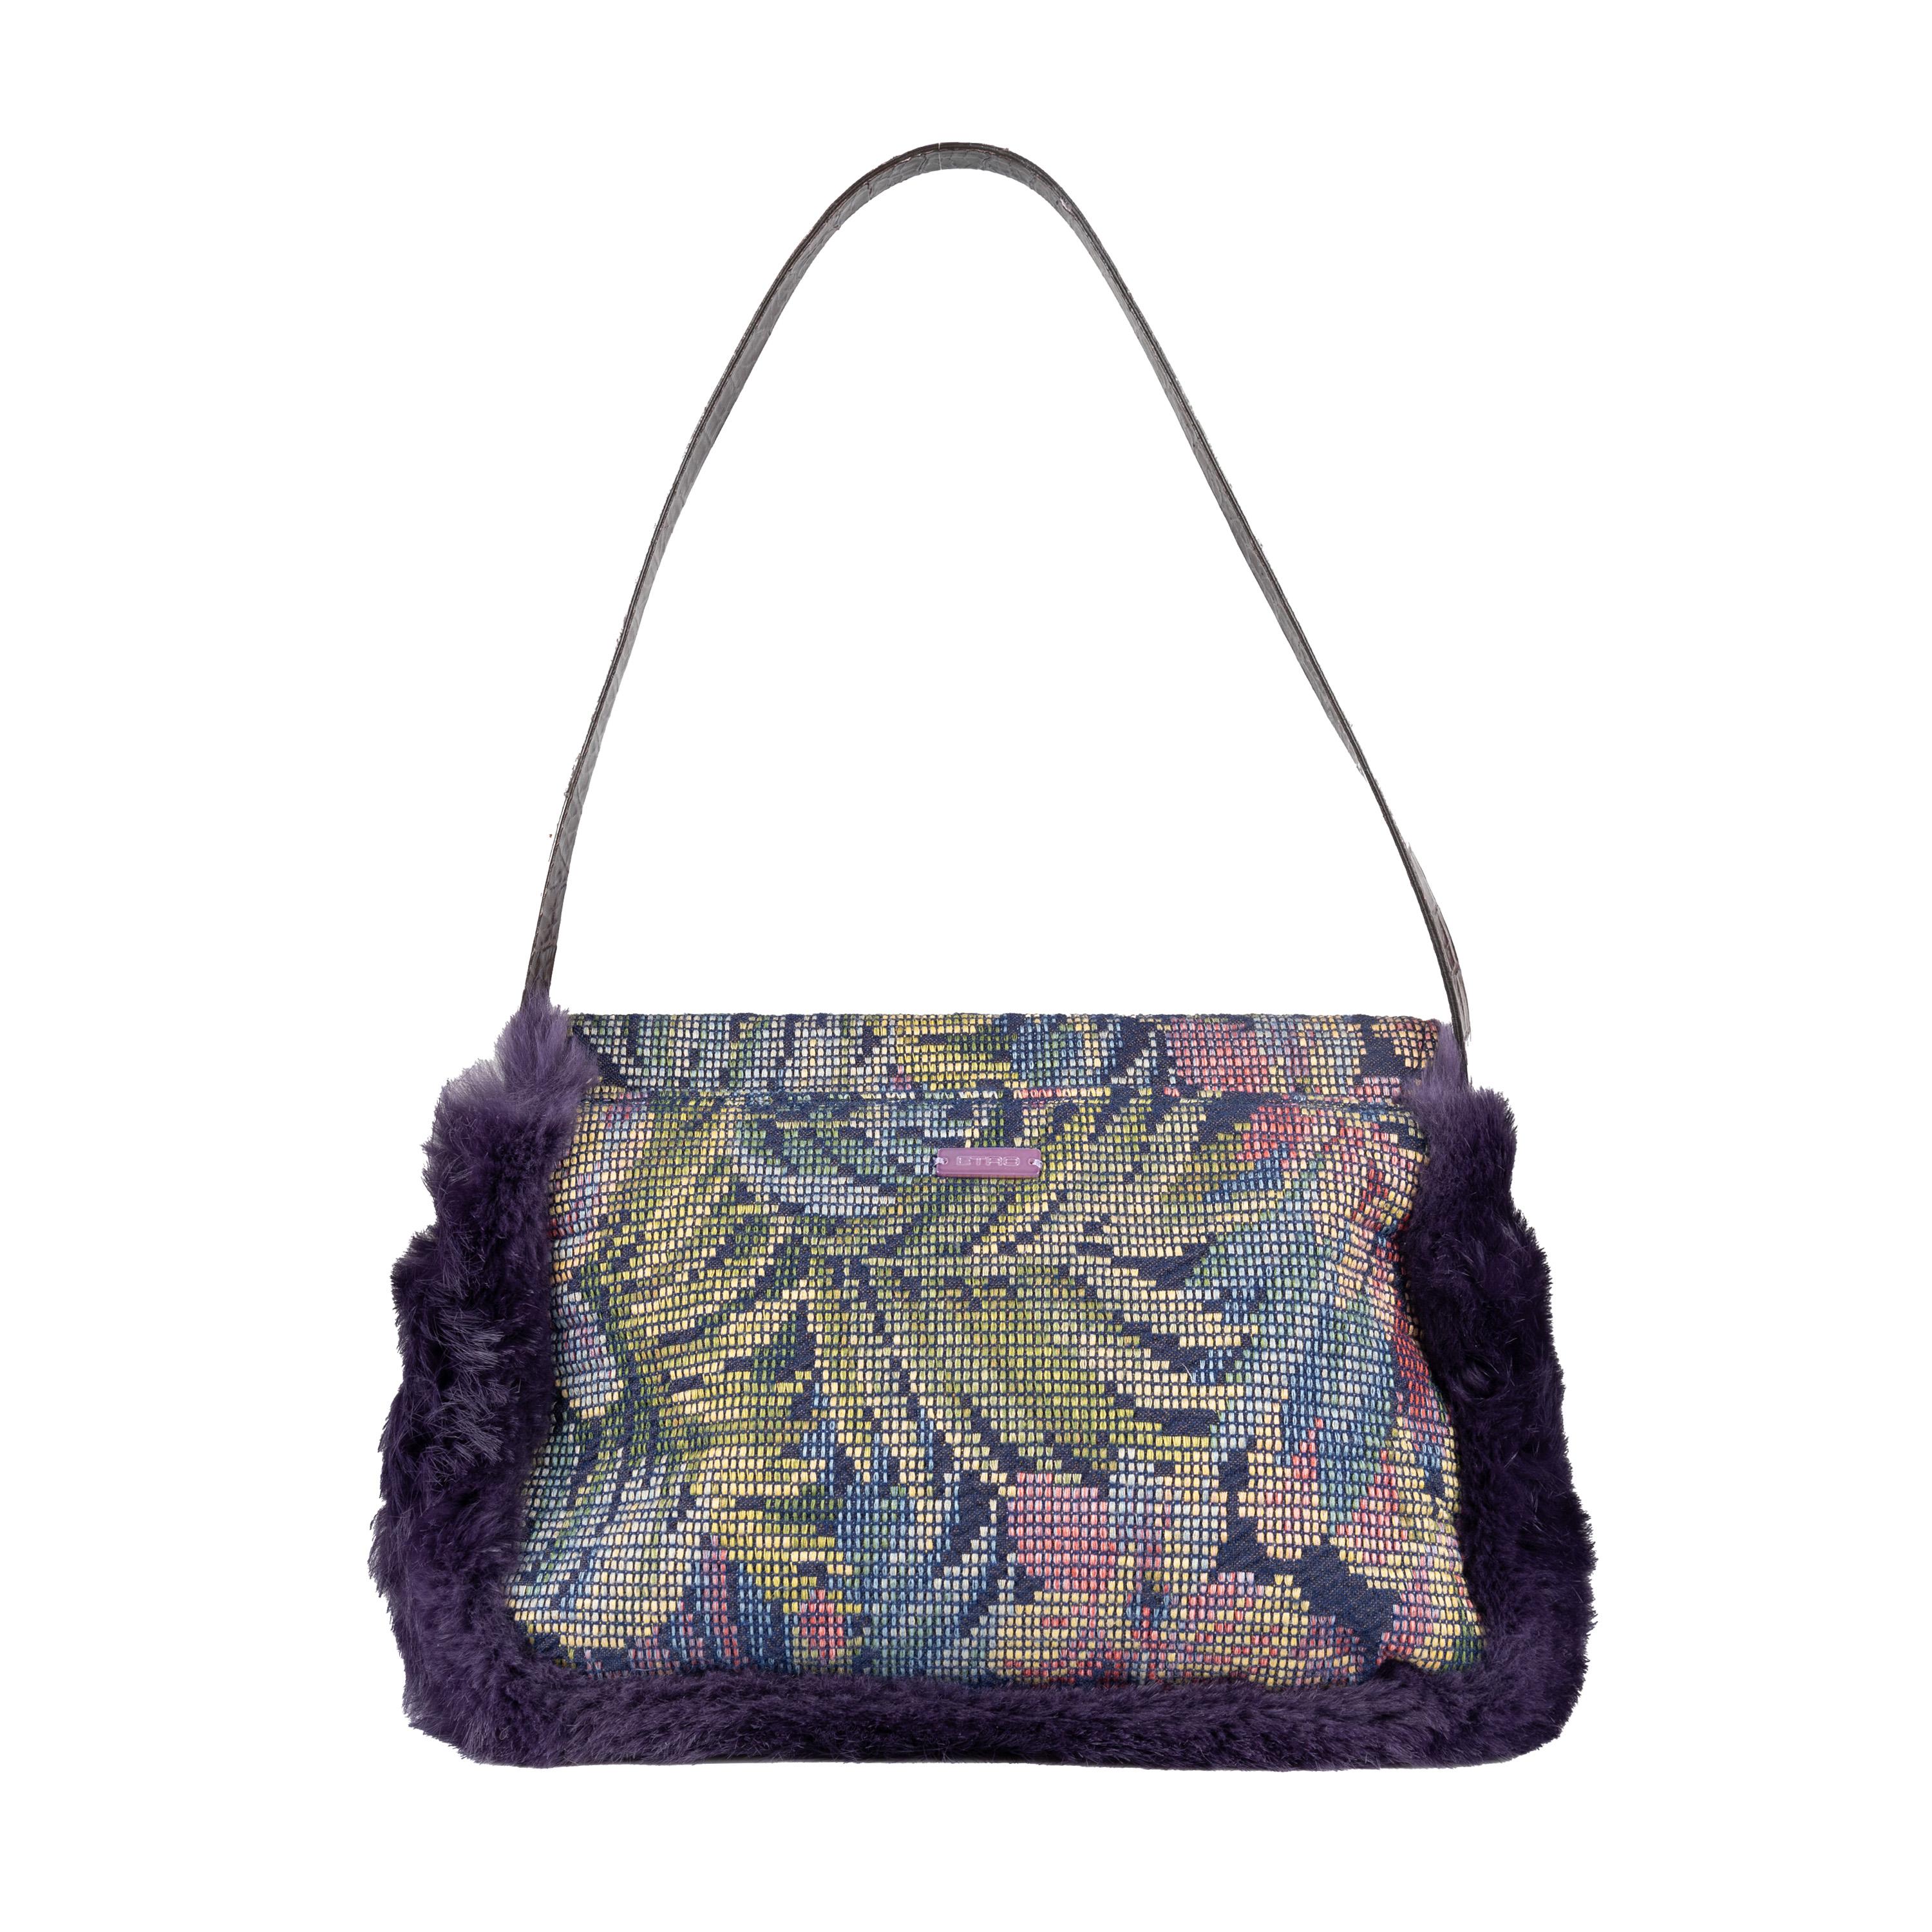 This vintage Etro handbag is crafted from multi color, woven floral print jacquard fabric, adorned with beading, sequins and plush purple fur. It has a flap with snap closure and a sturdy embossed leather strap. The interior is lined with luxurious